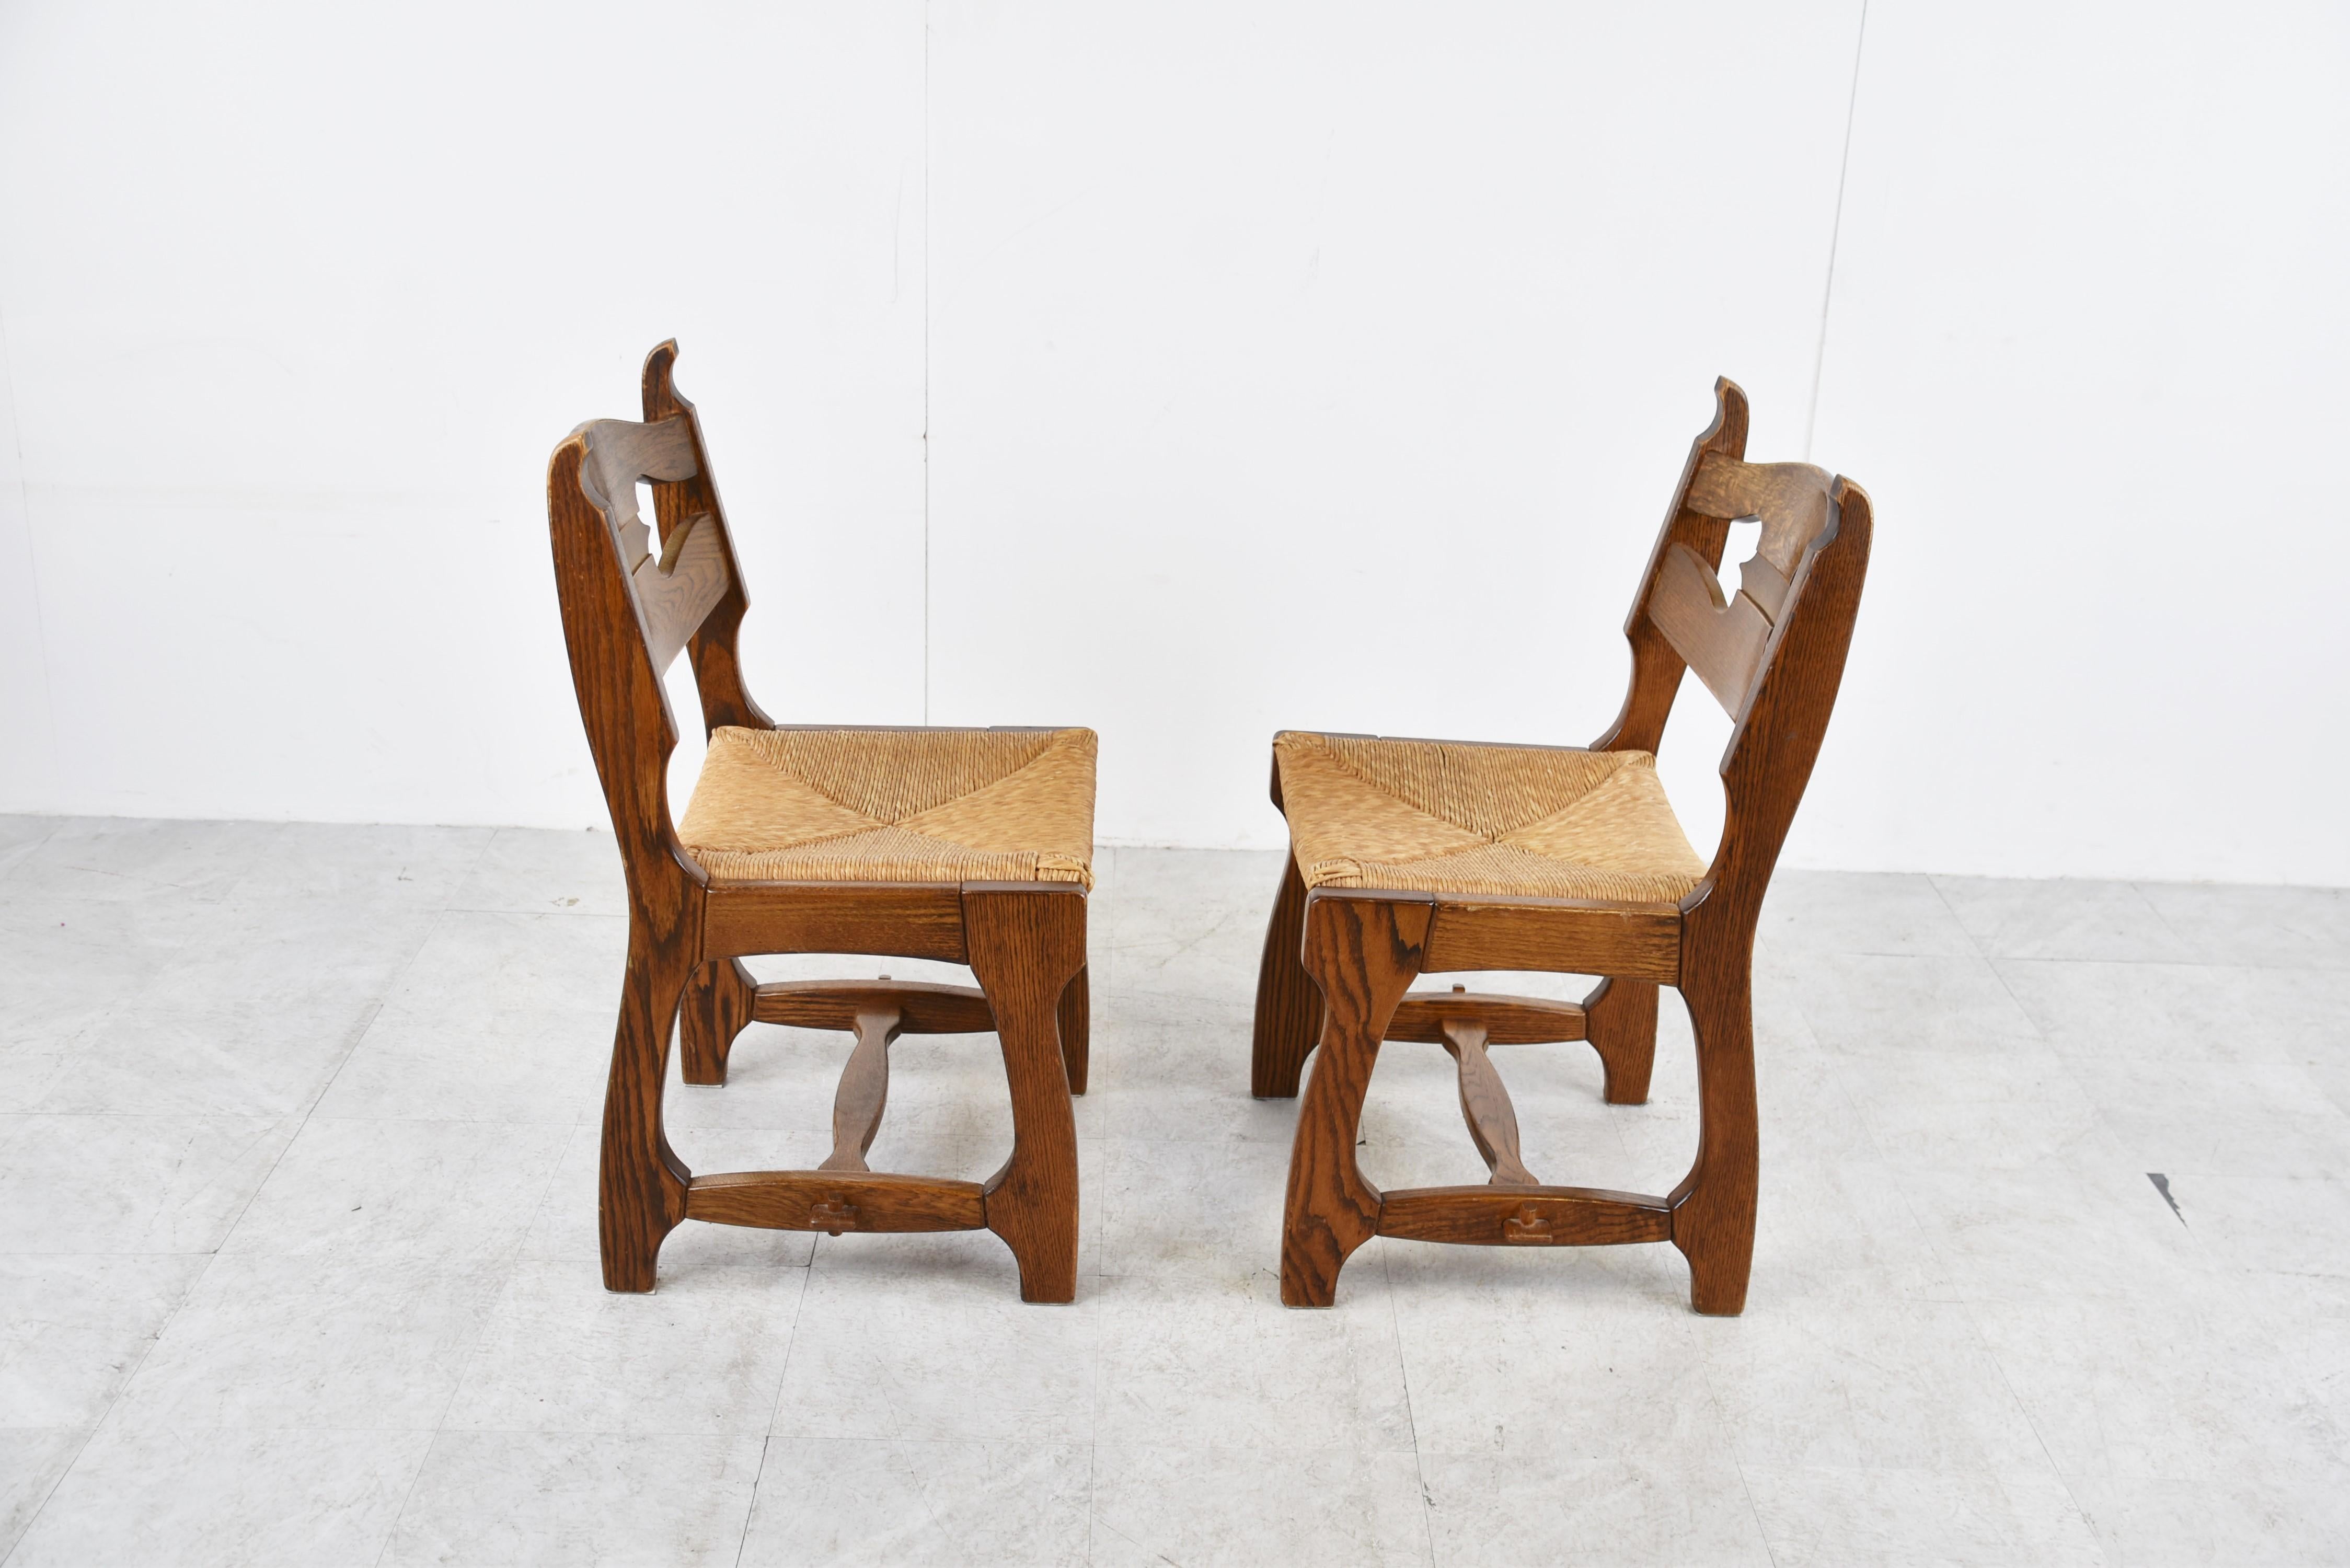 Vintage Oak and Wicker Brutalist Dining Chairs, 1960s For Sale 1